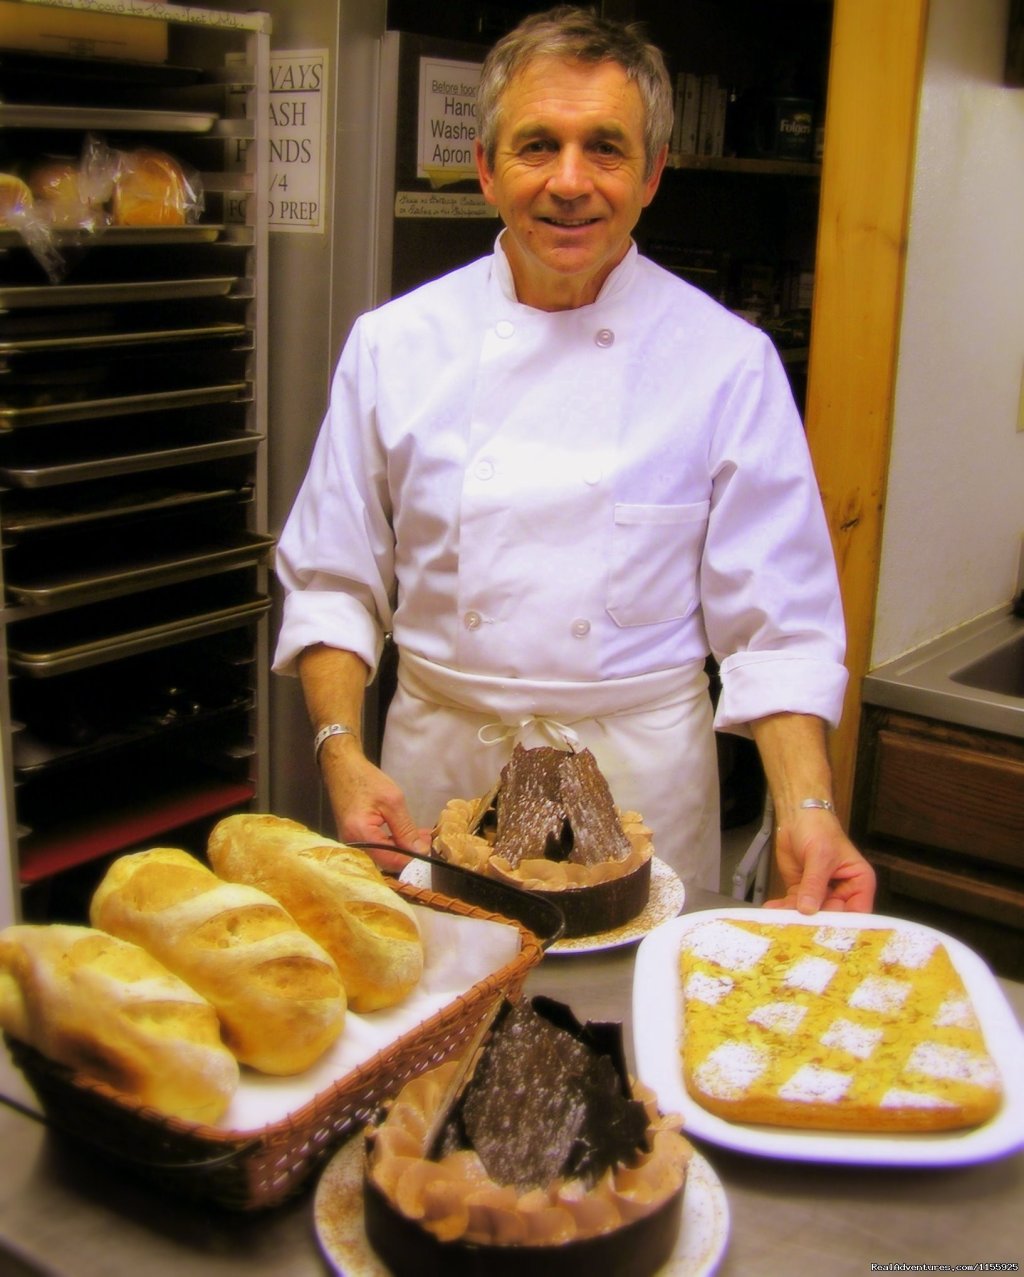 Our beloved French chef Bernard | Dog Sledding Vacations & Dog Mushing Tours | Image #7/9 | 